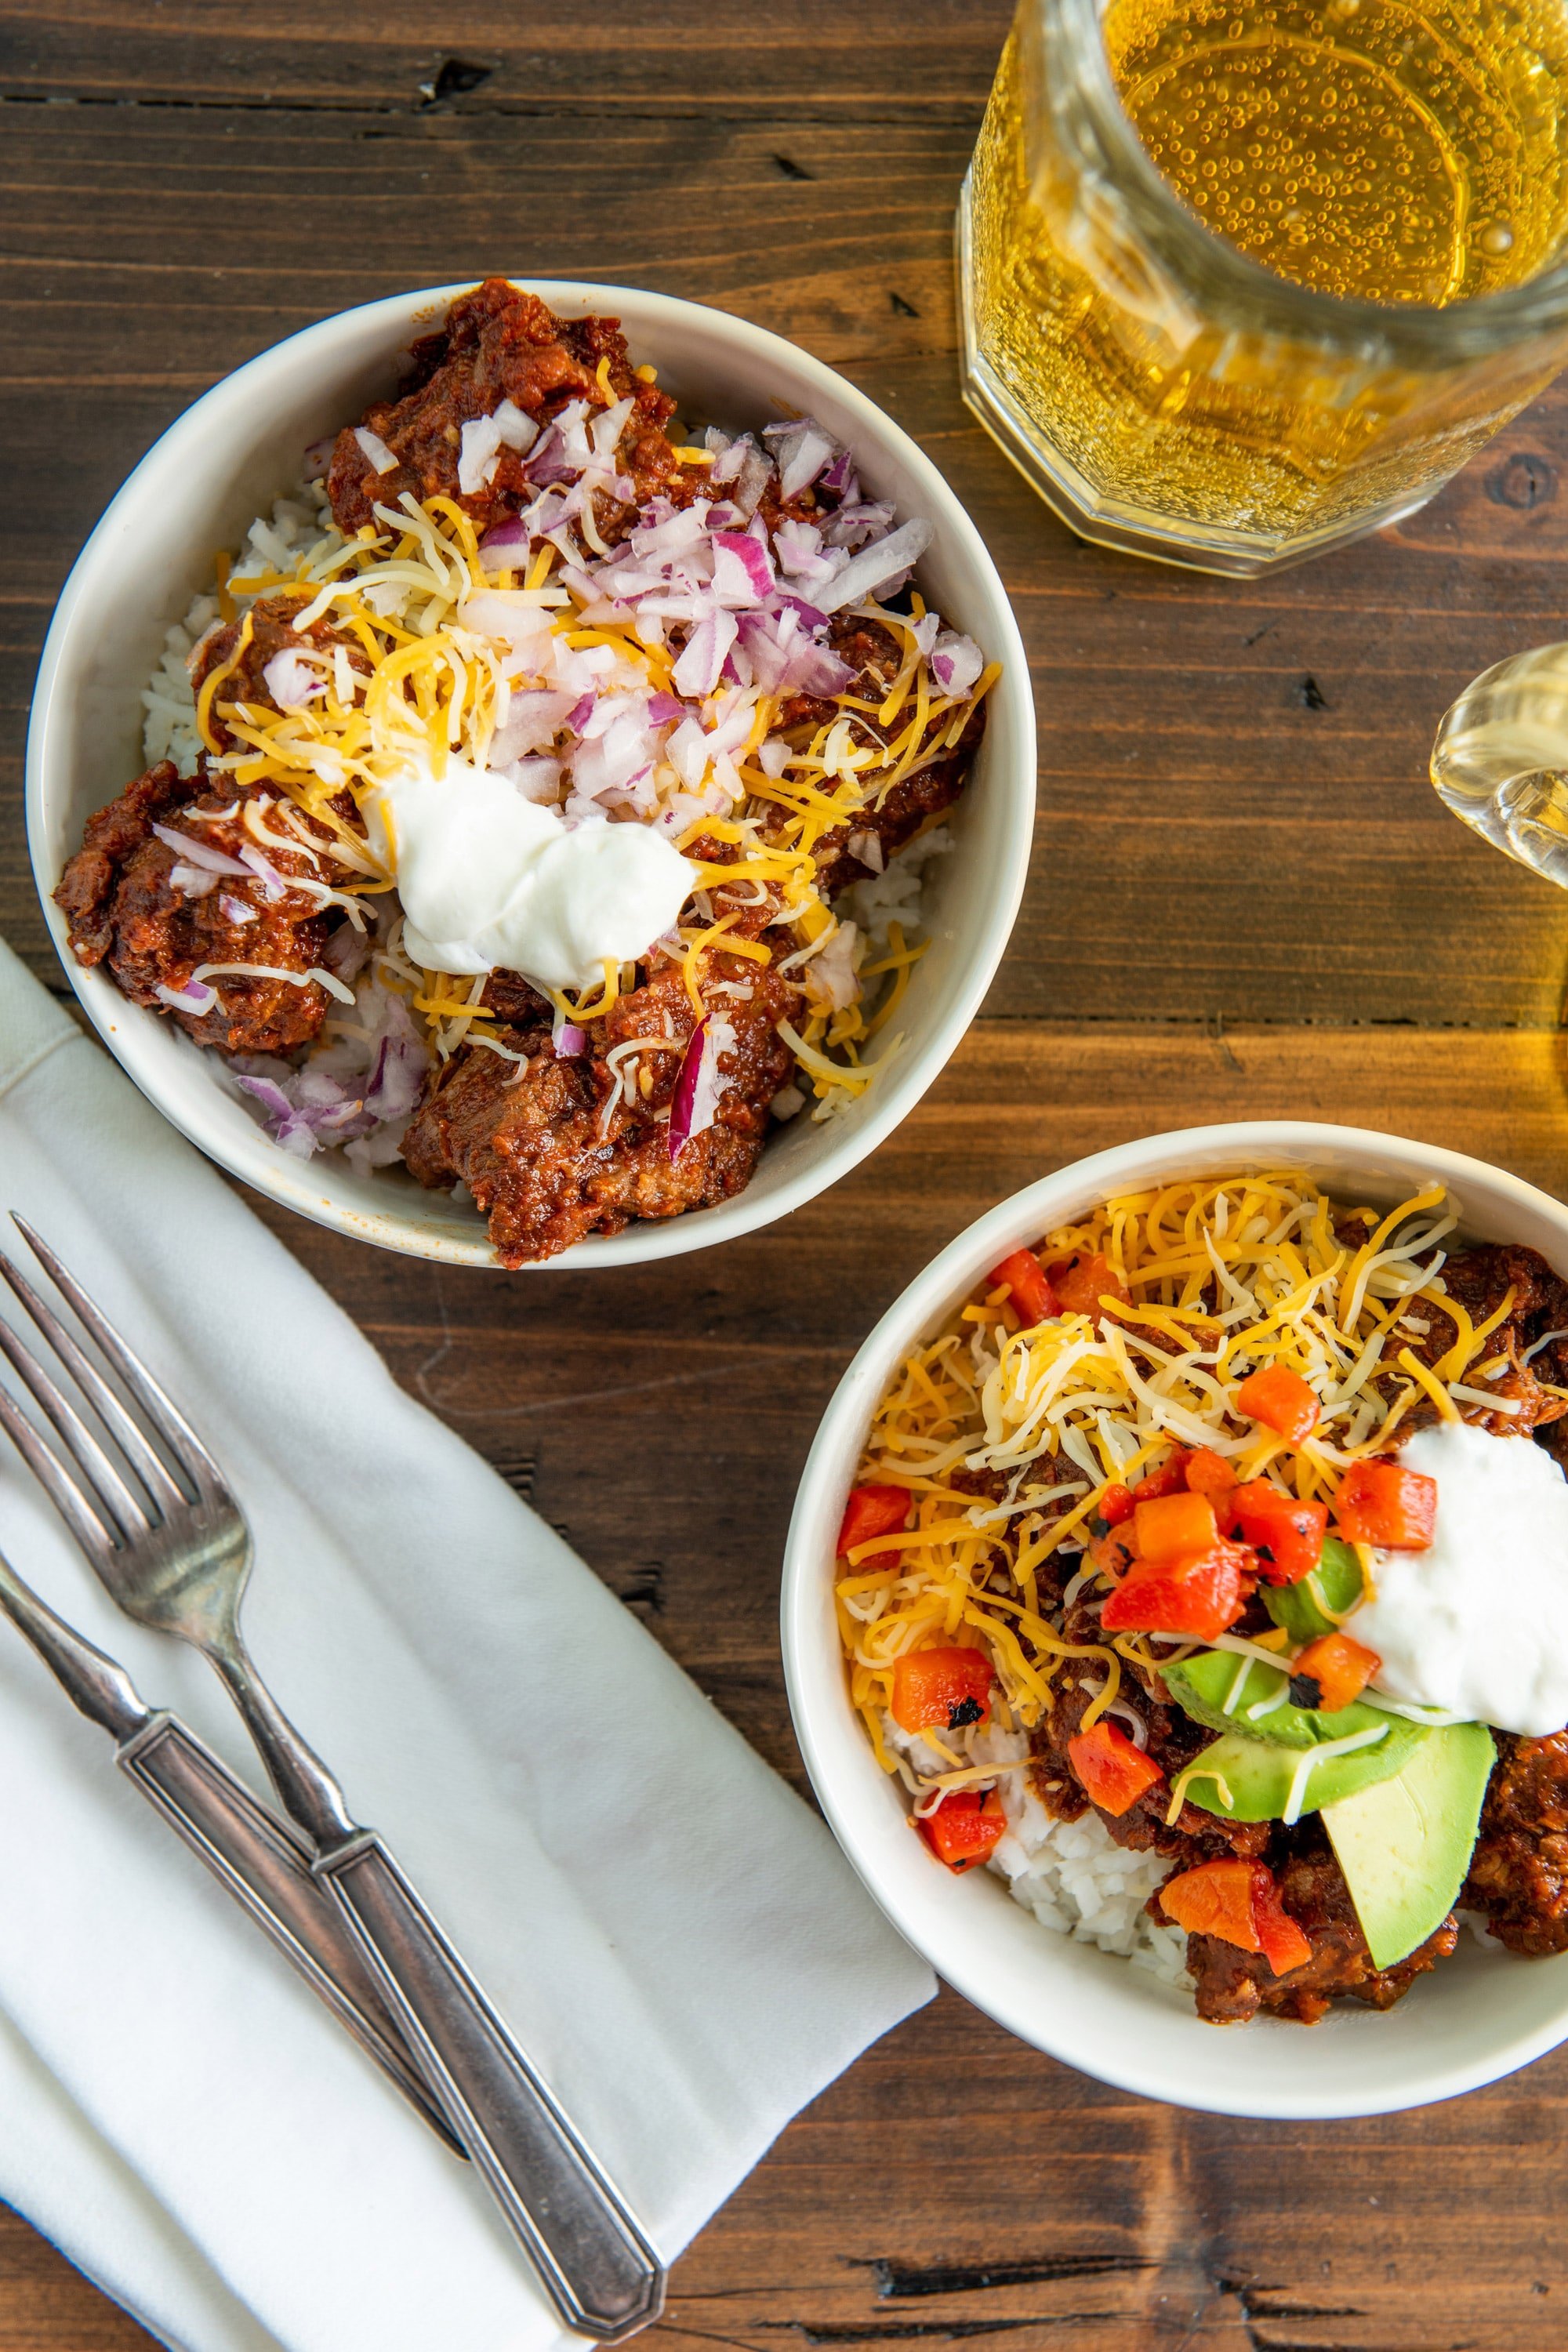 Homemade Texas Chili Recipe in bowls with various toppings.